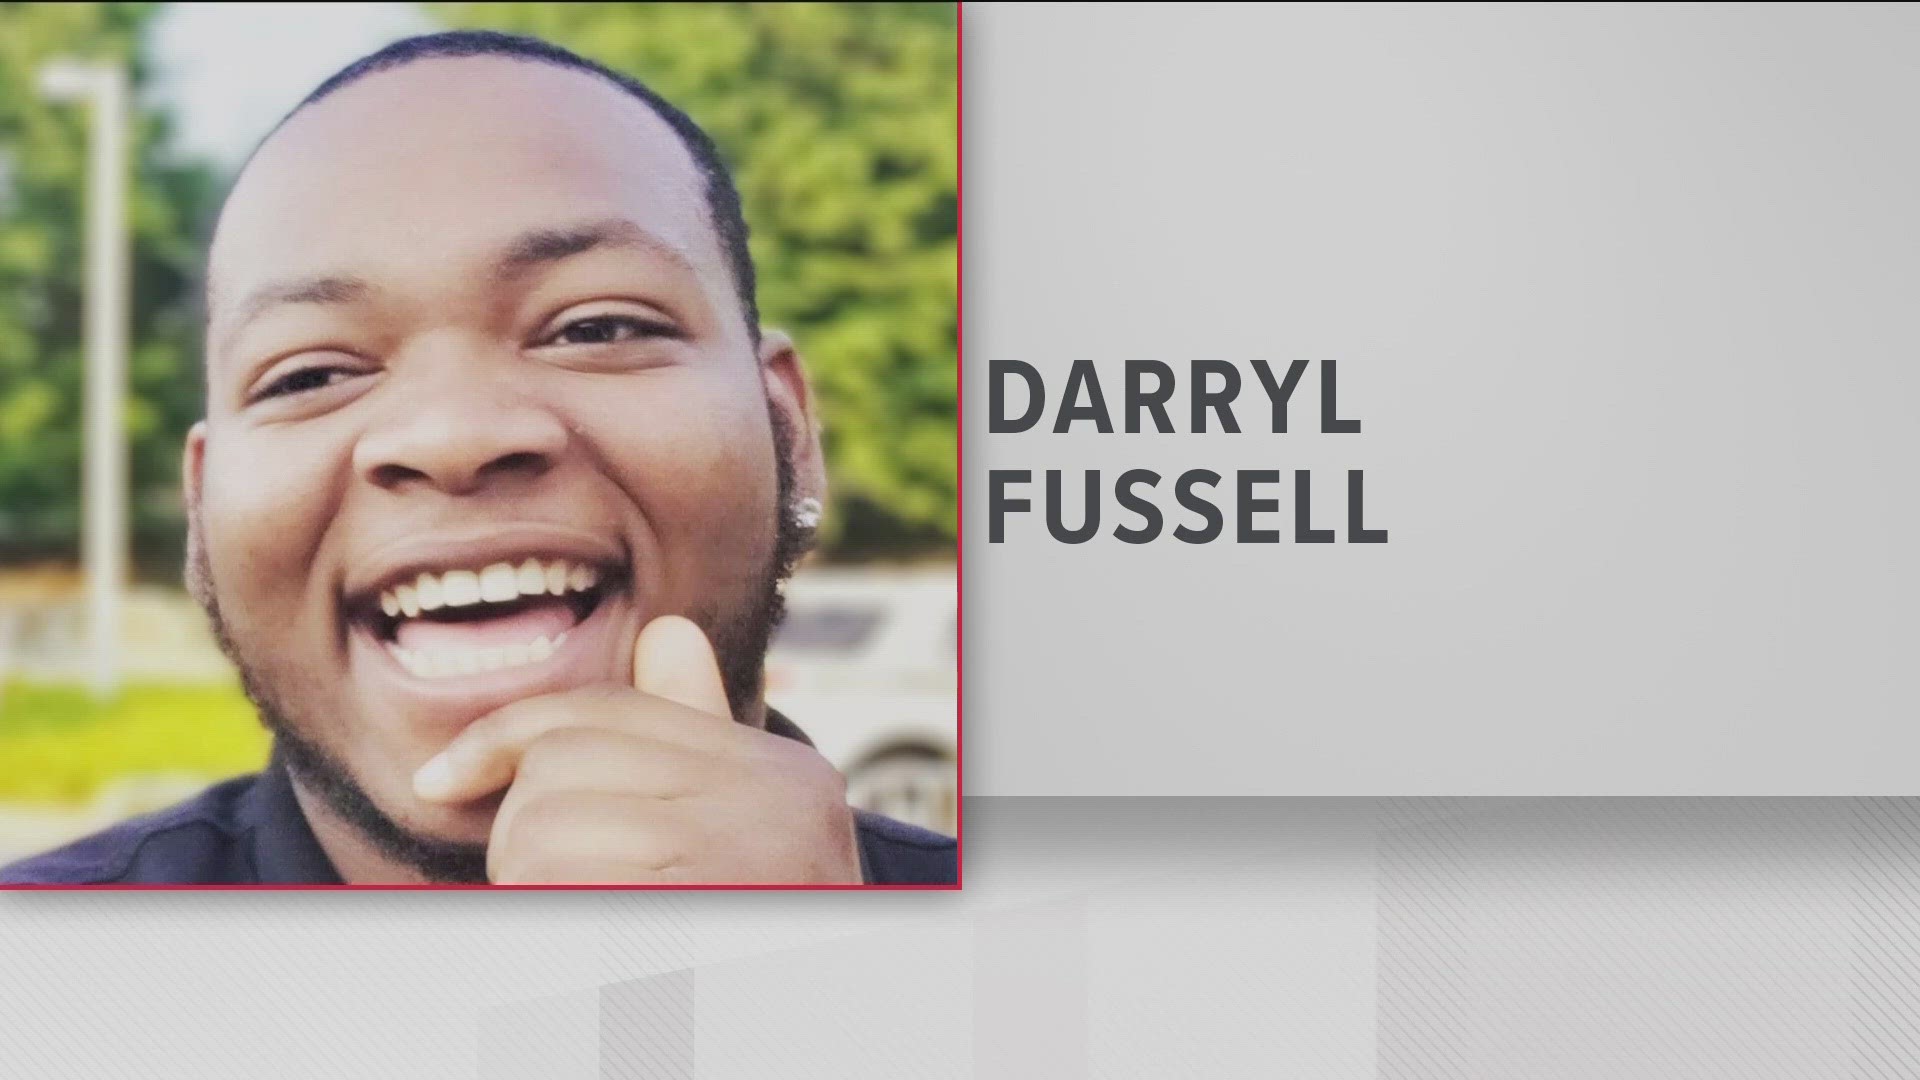 Darryll Fussell II, a student at Georgia Gwinnett College, was going through mental health struggles at the time of his death on April 13, the lawsuit reads.